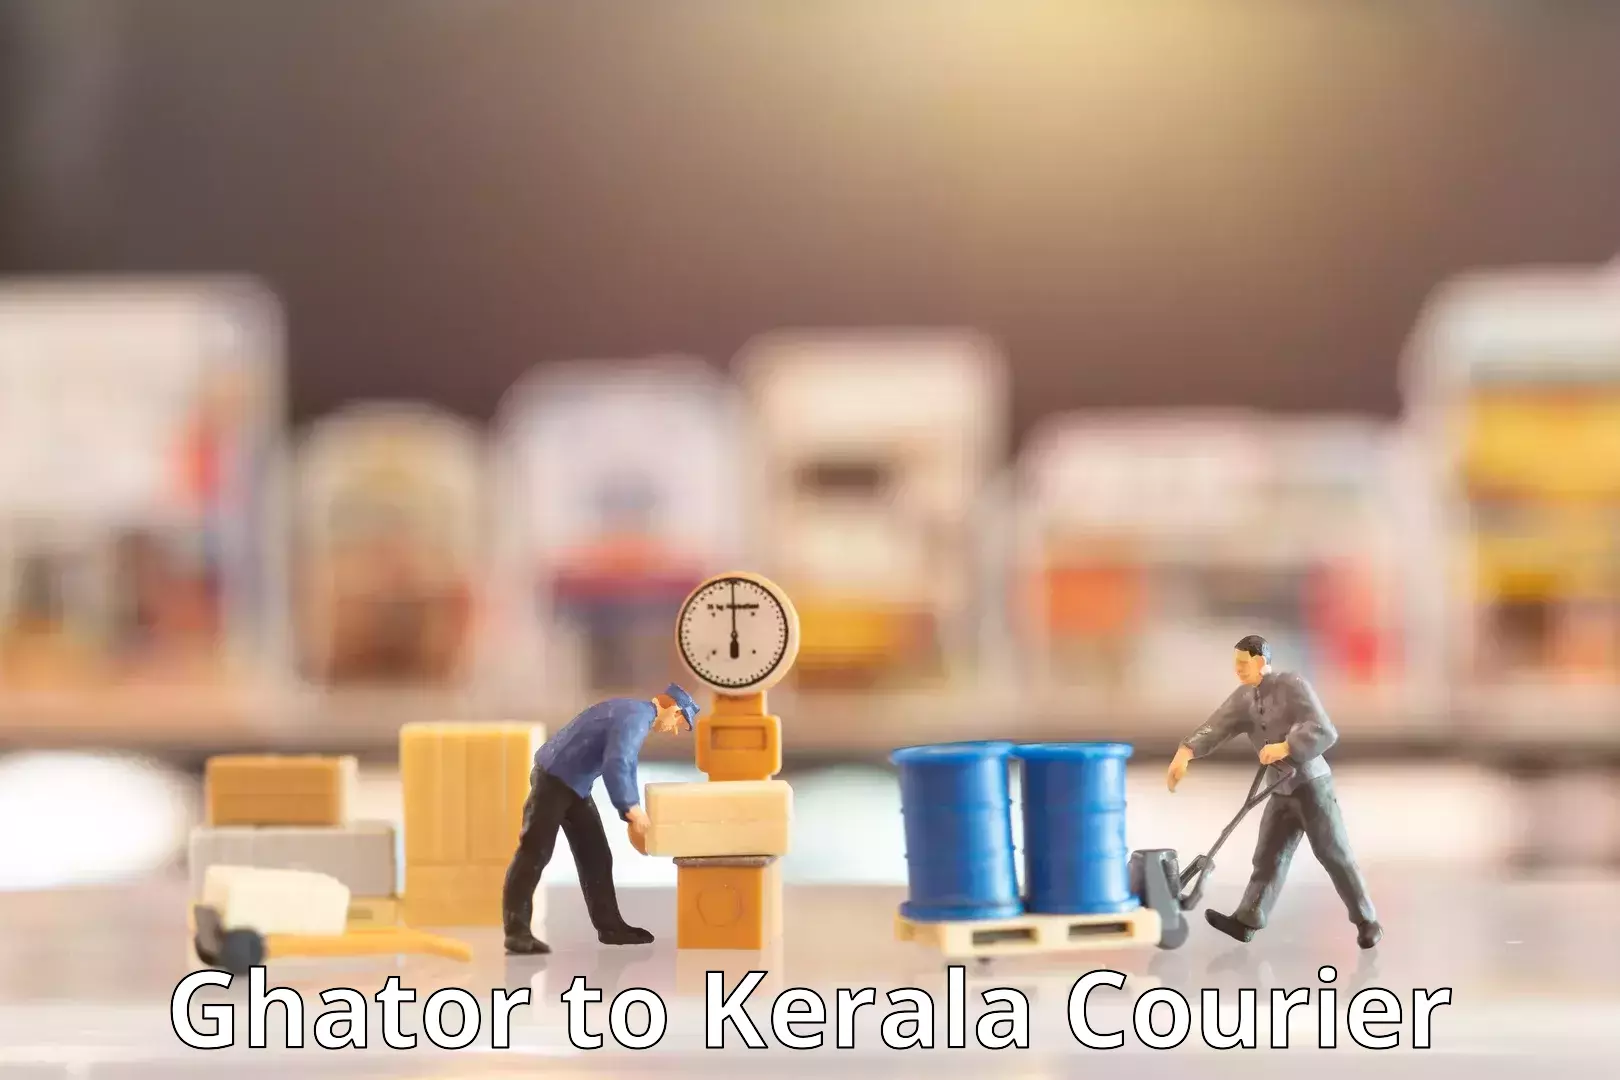 State-of-the-art courier technology Ghator to Koothattukulam